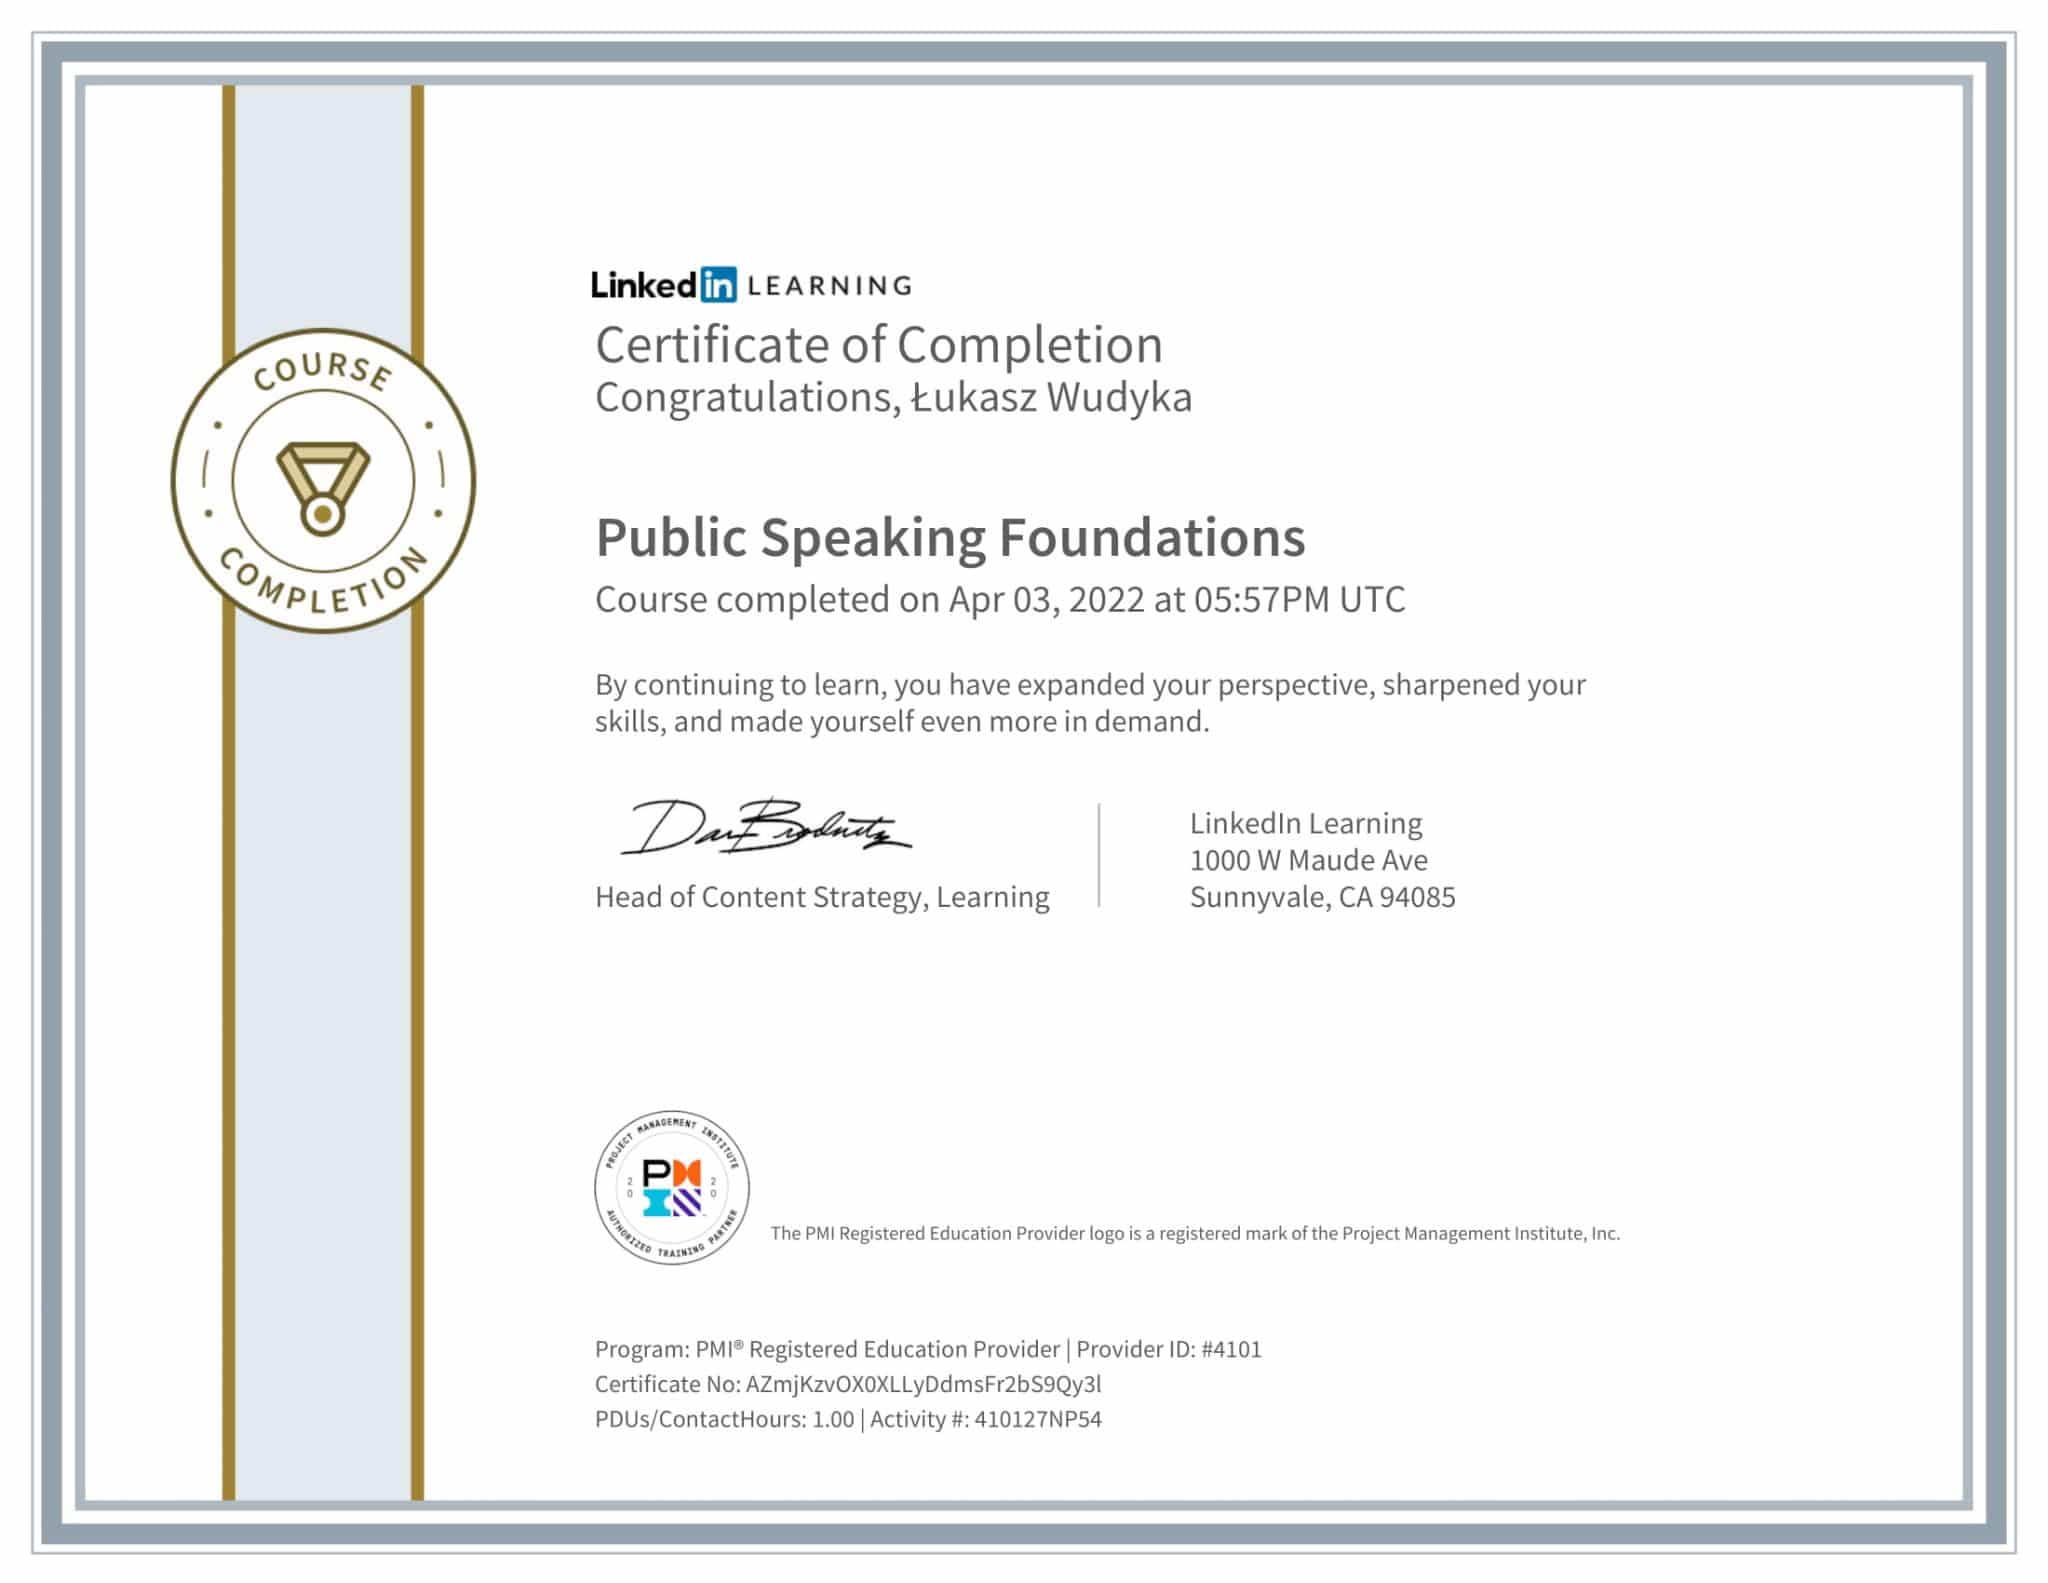 CertificateOfCompletion_Public Speaking Foundations-1